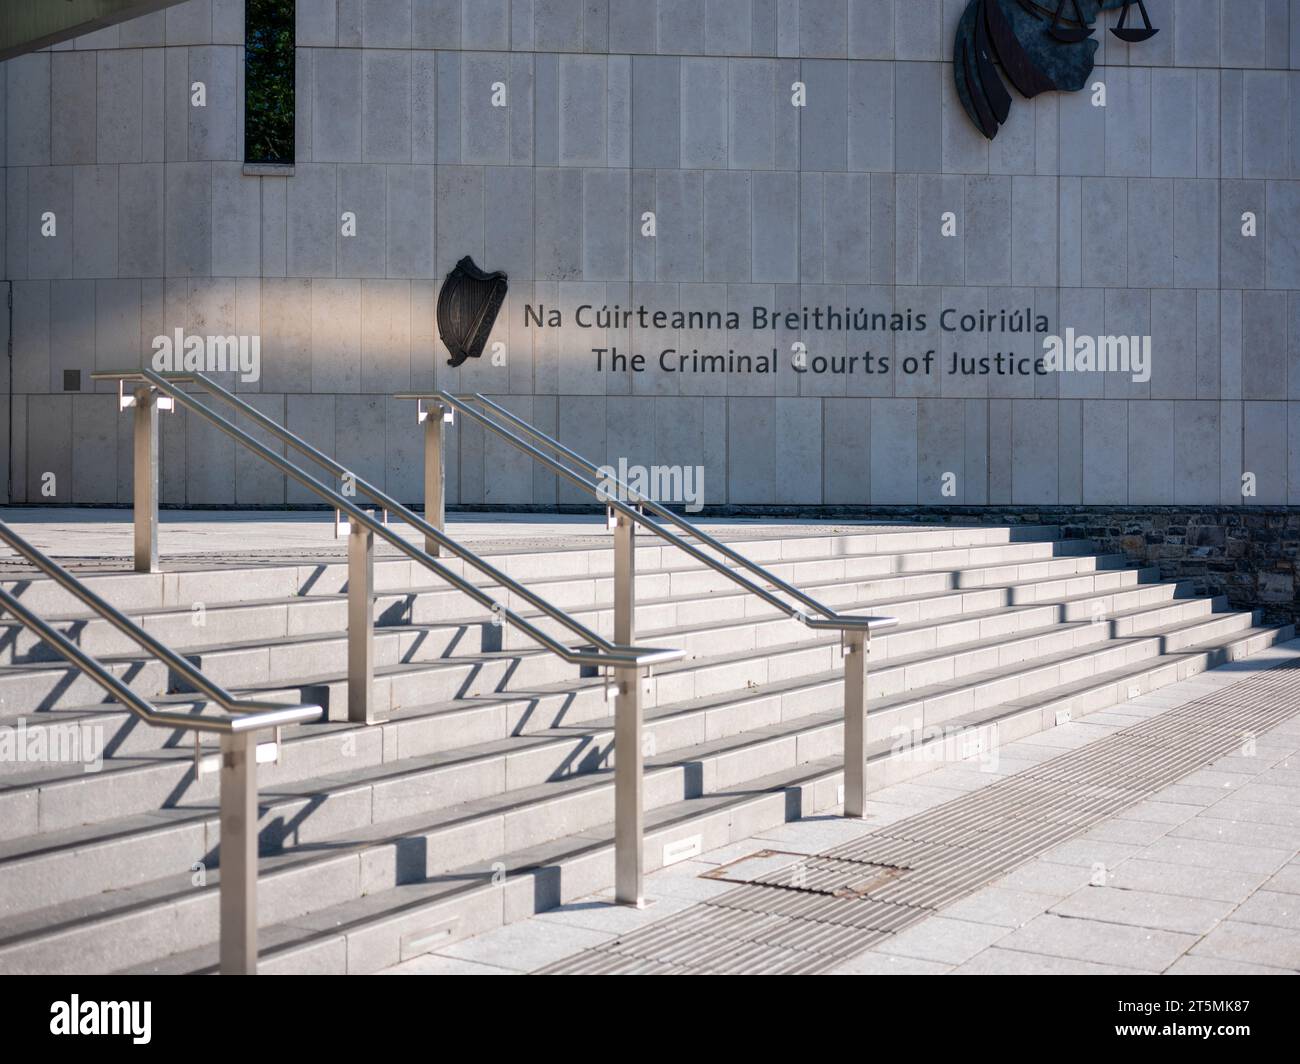 The Criminal Courts of Justice, in Dublin city, Ireland. Stock Photo